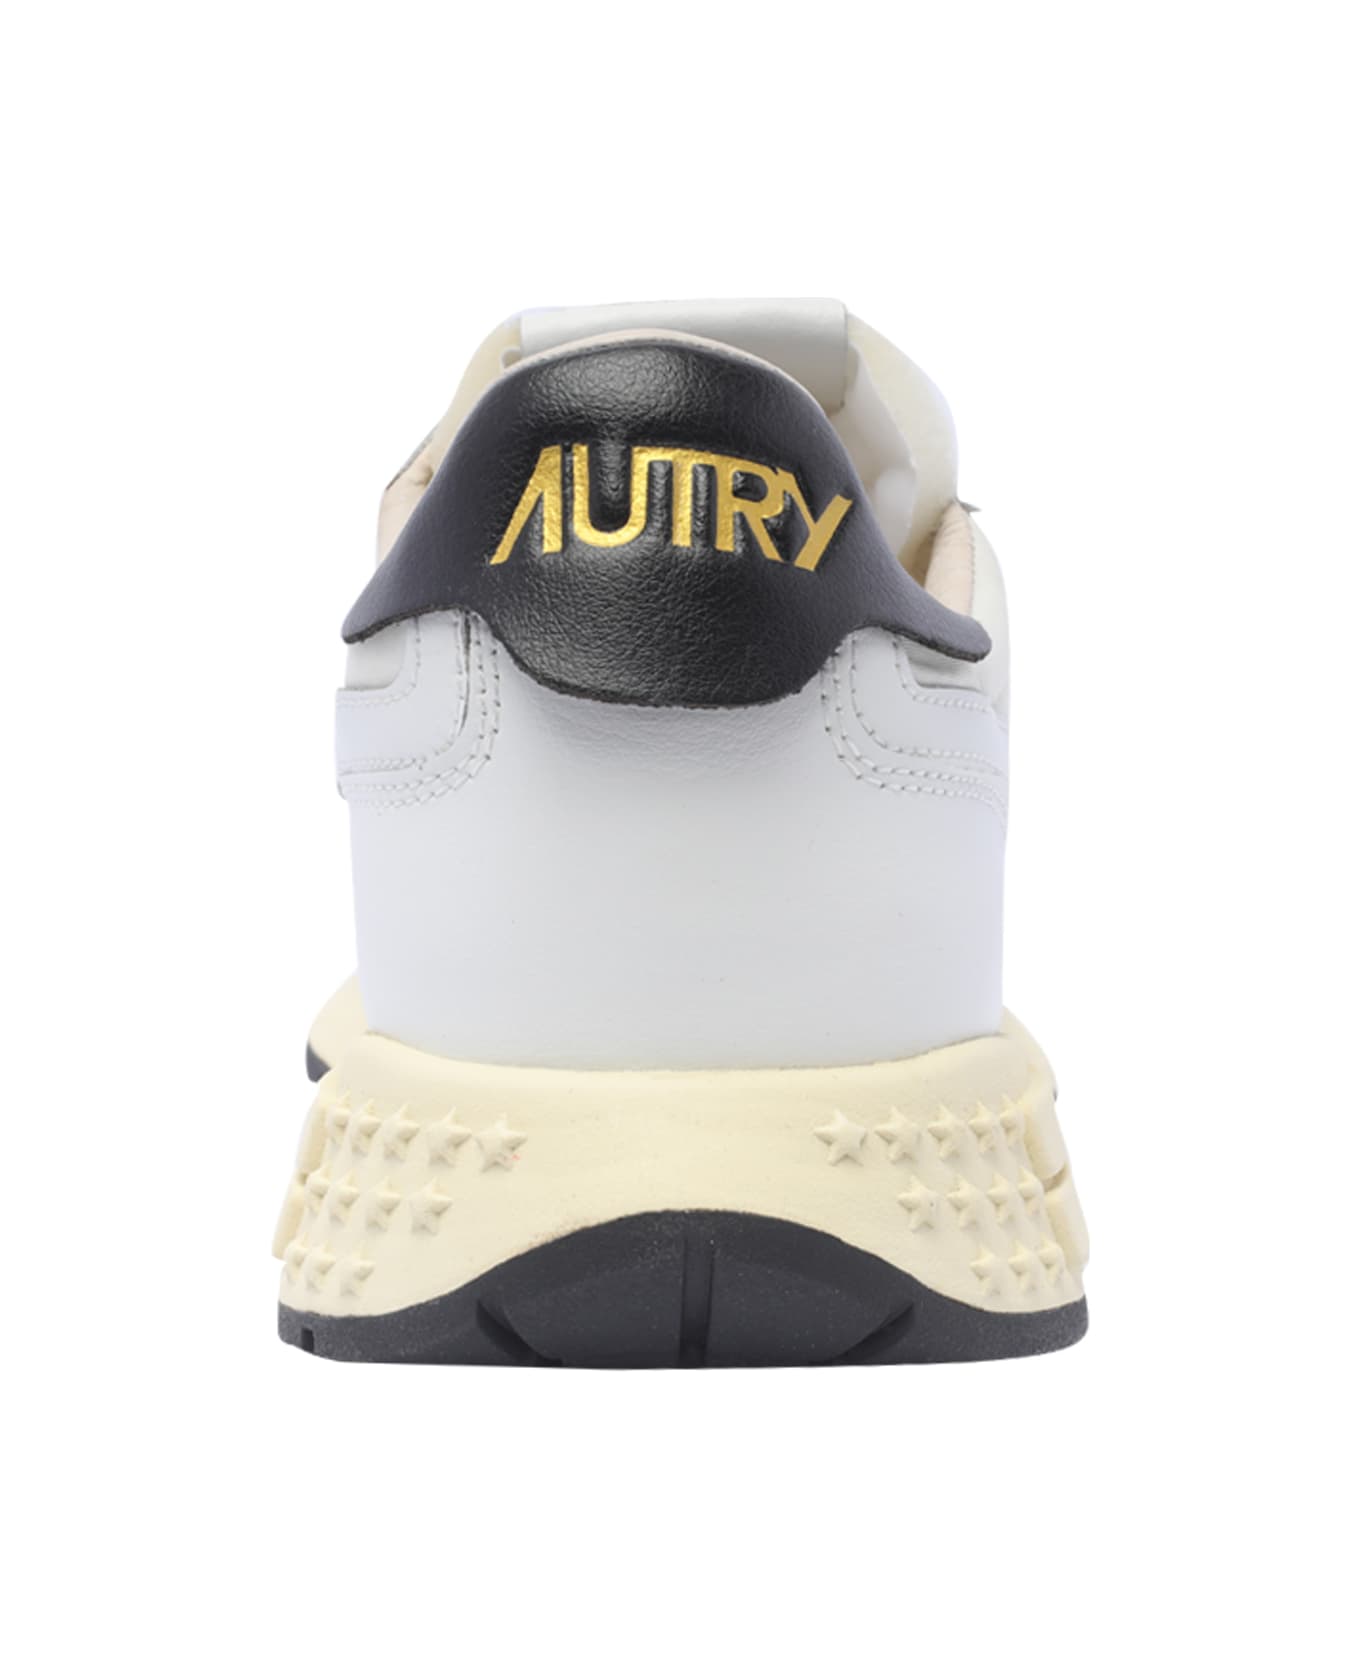 Autry Reelwind Sneakers スニーカー